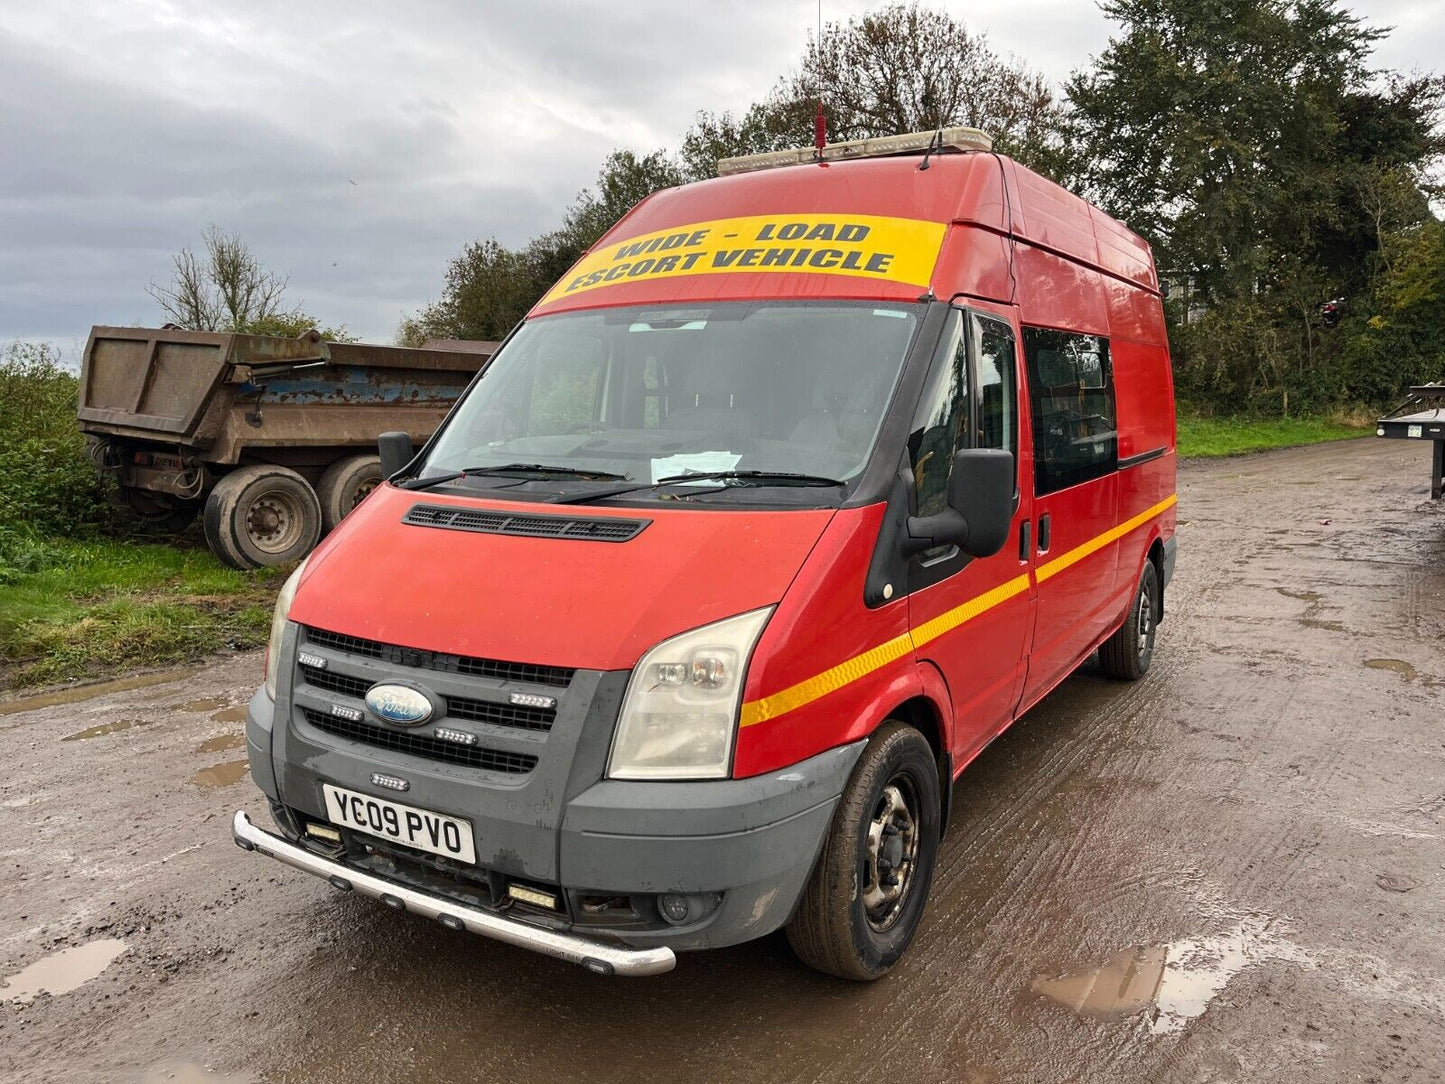 Bid on 2009 FORD TRANSIT WELFARE VEHICLE- Buy &amp; Sell on Auction with EAMA Group